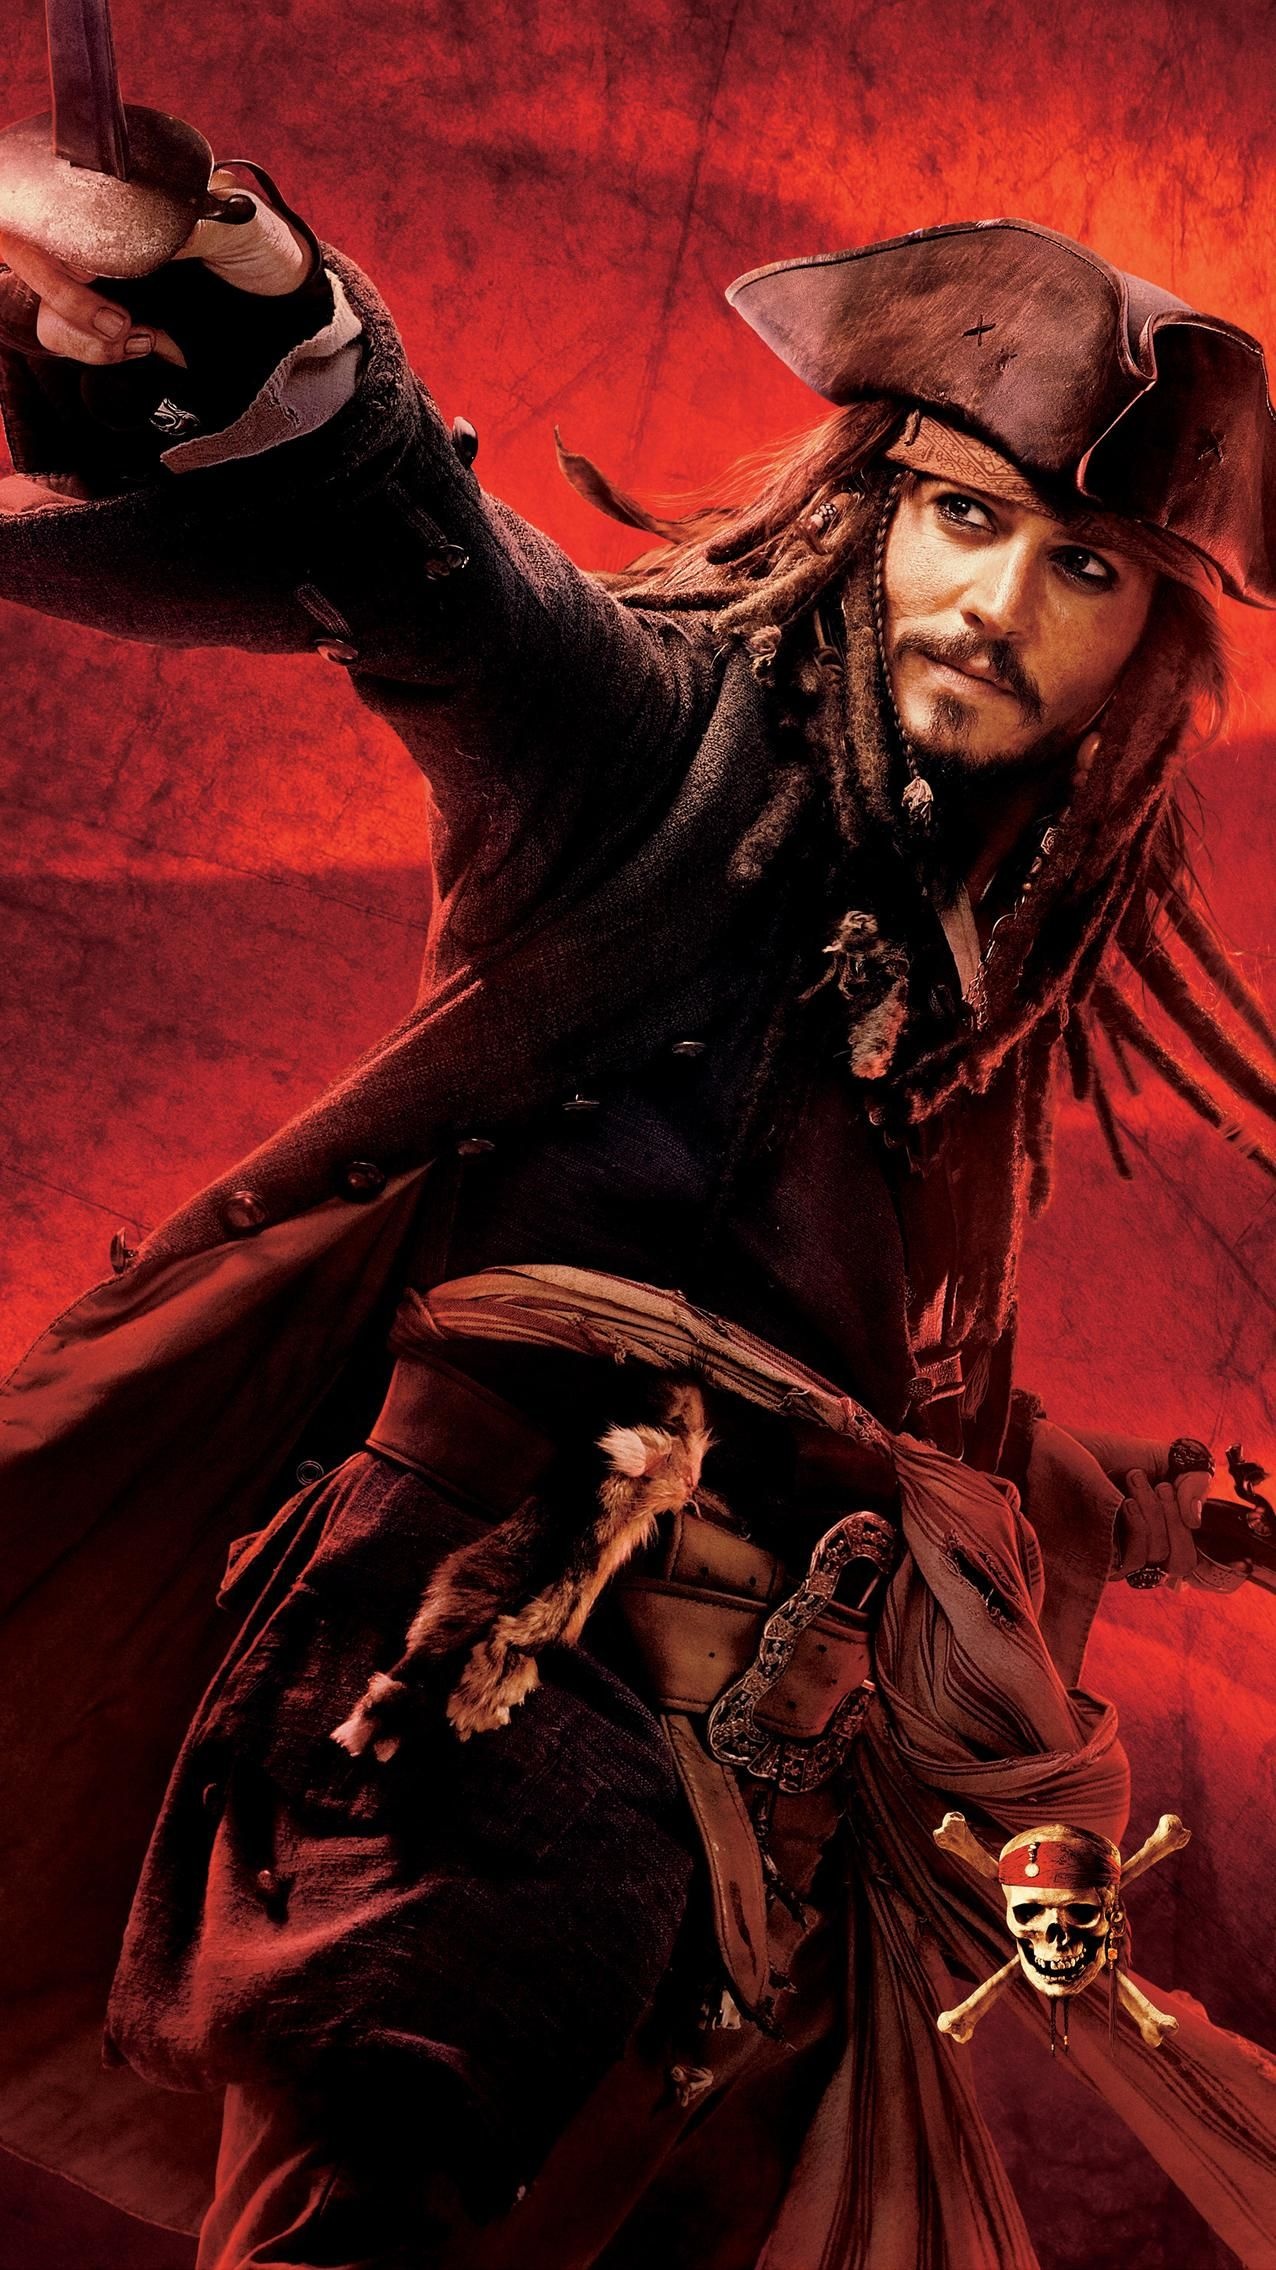 Pirates of the Caribbean, At Worlds End, Phone wallpaper, MovieMania, 1280x2270 HD Handy